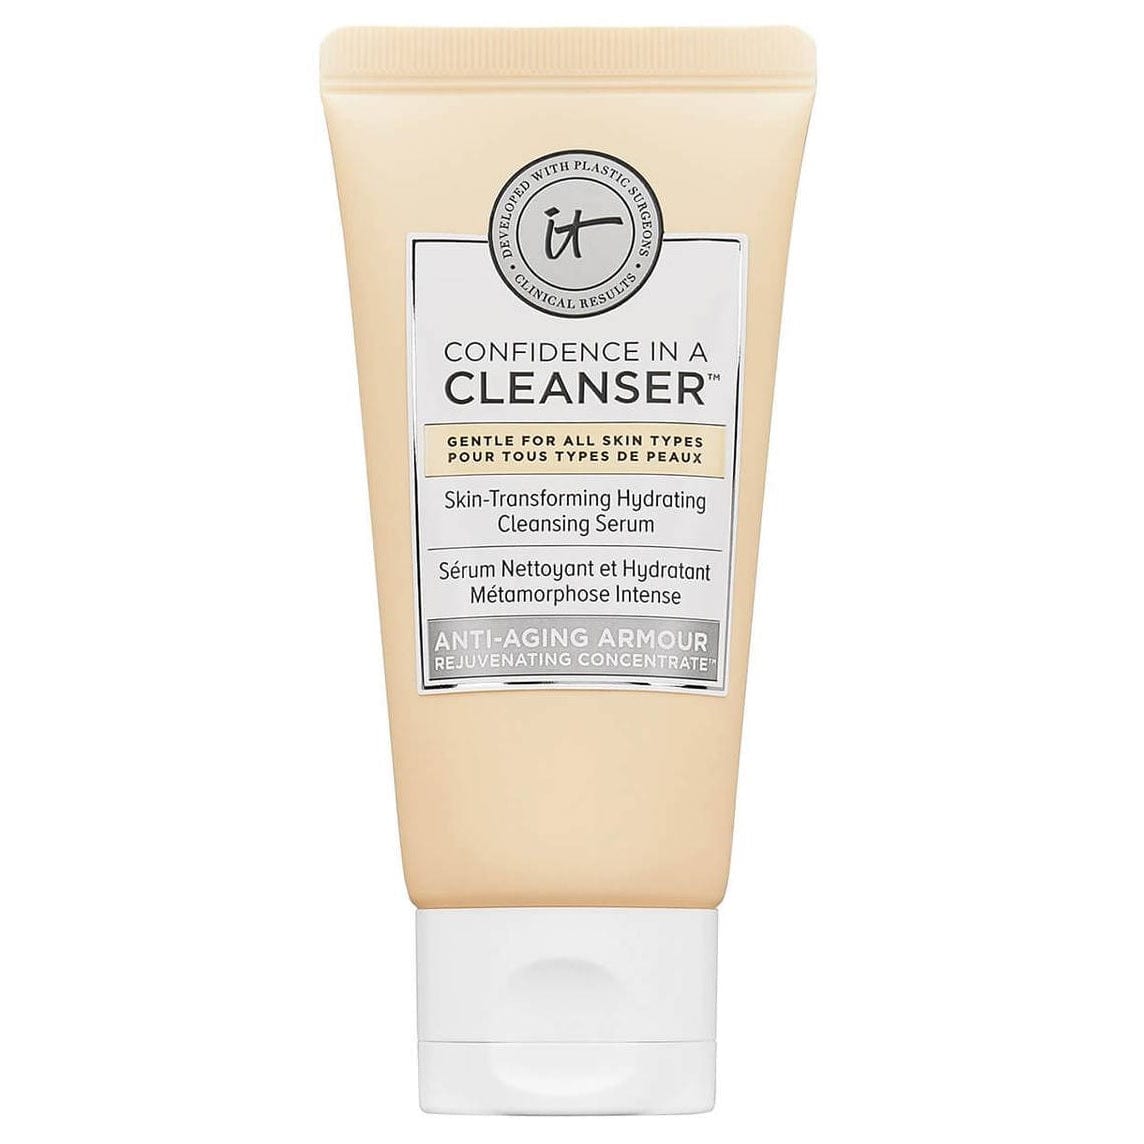 IT COSMETICS Beauty IT Cosmetics Confidence in a Cleanser 50ml